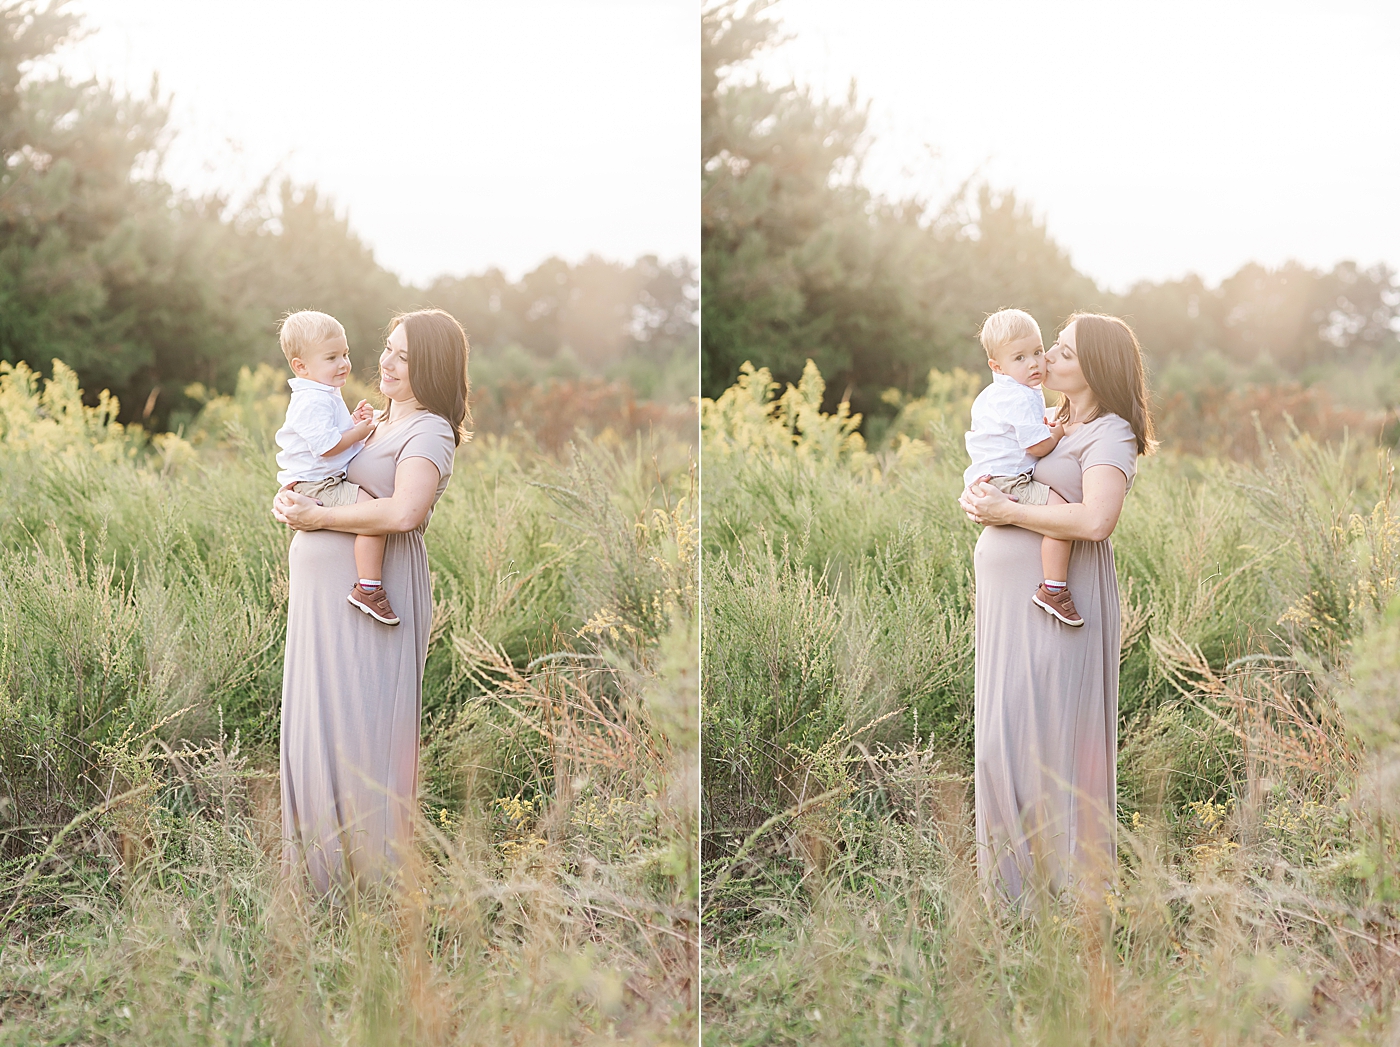 Mom and toddler son interacting | Photo by Davidson Maternity Photographer Anna Wisjo